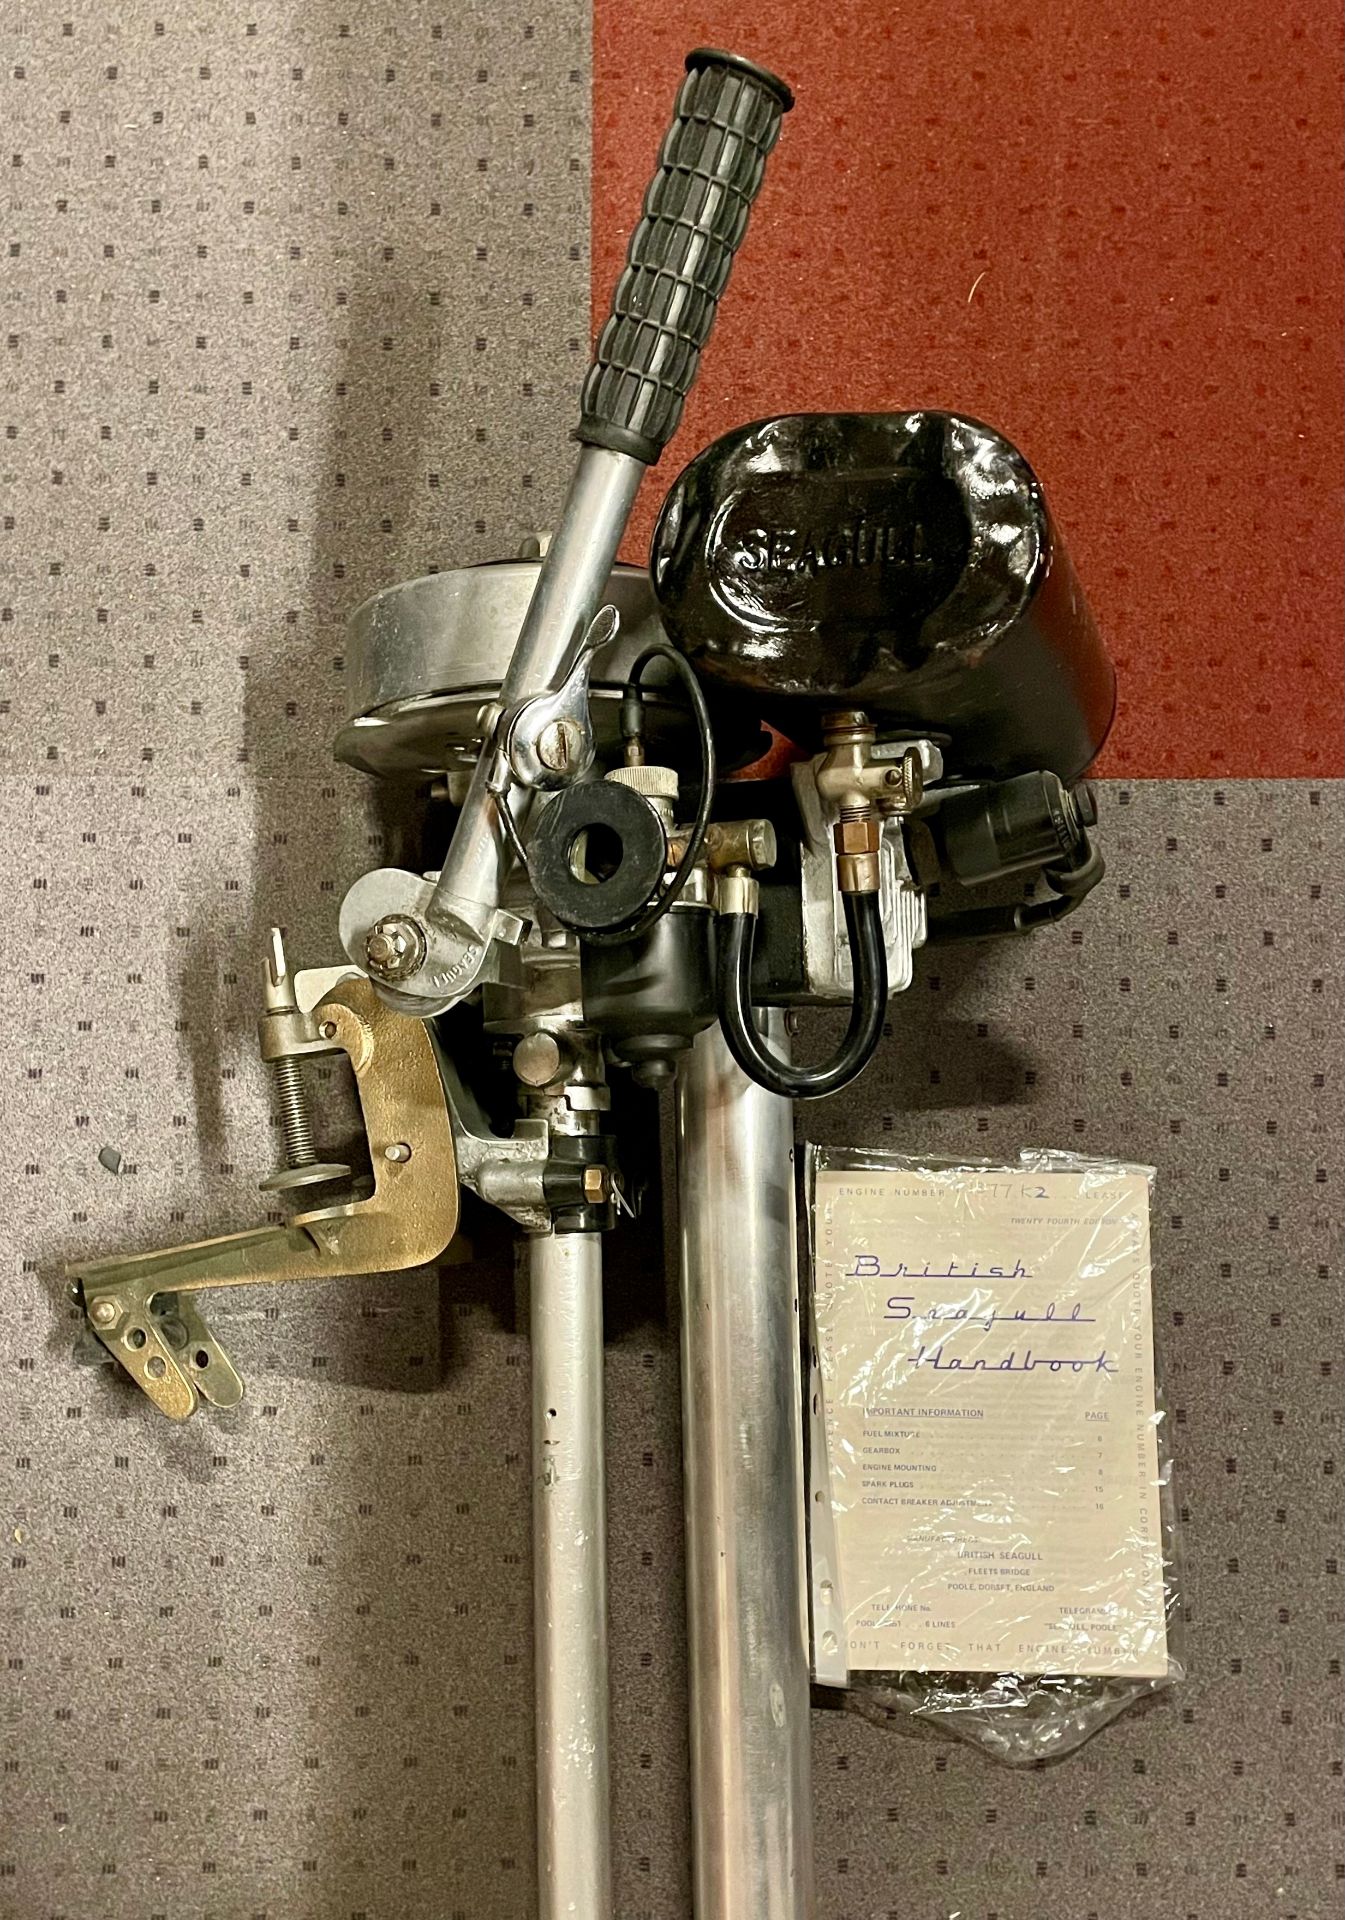 A 1960s British Seagull outboard motor, with original handbook. - Image 2 of 2